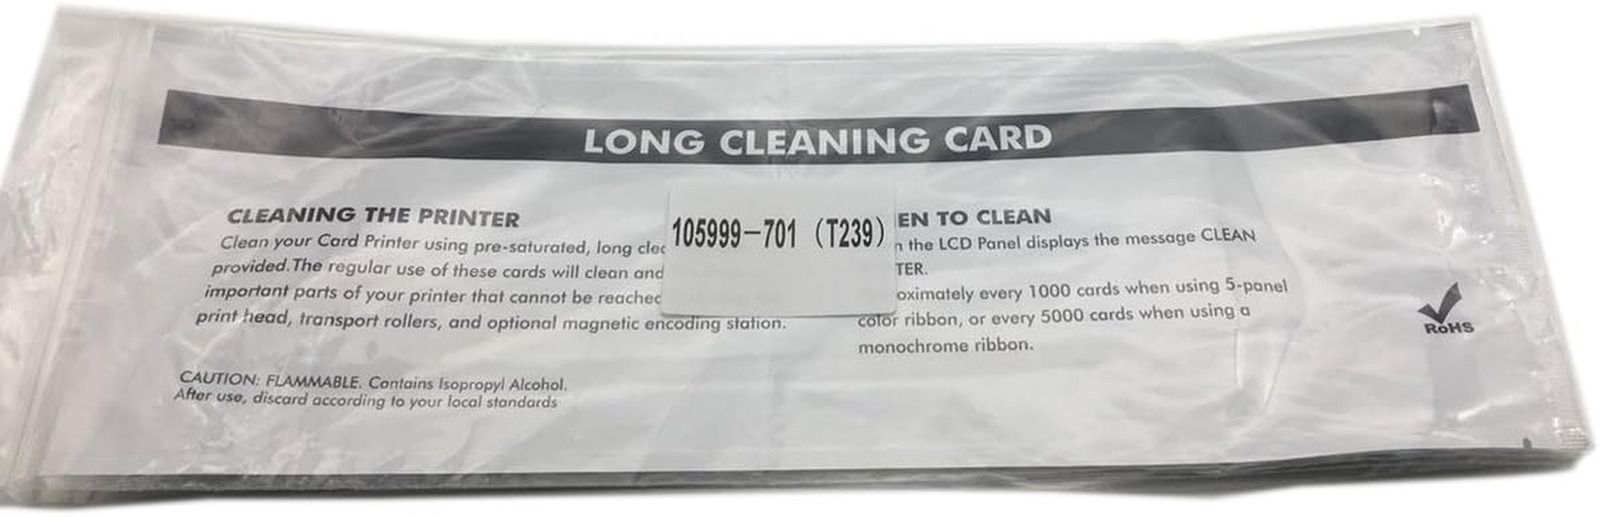 Cleaning Repair Kits CM-105999-701 for ZXP 7 Card Printer, Pack of 12 Print Path